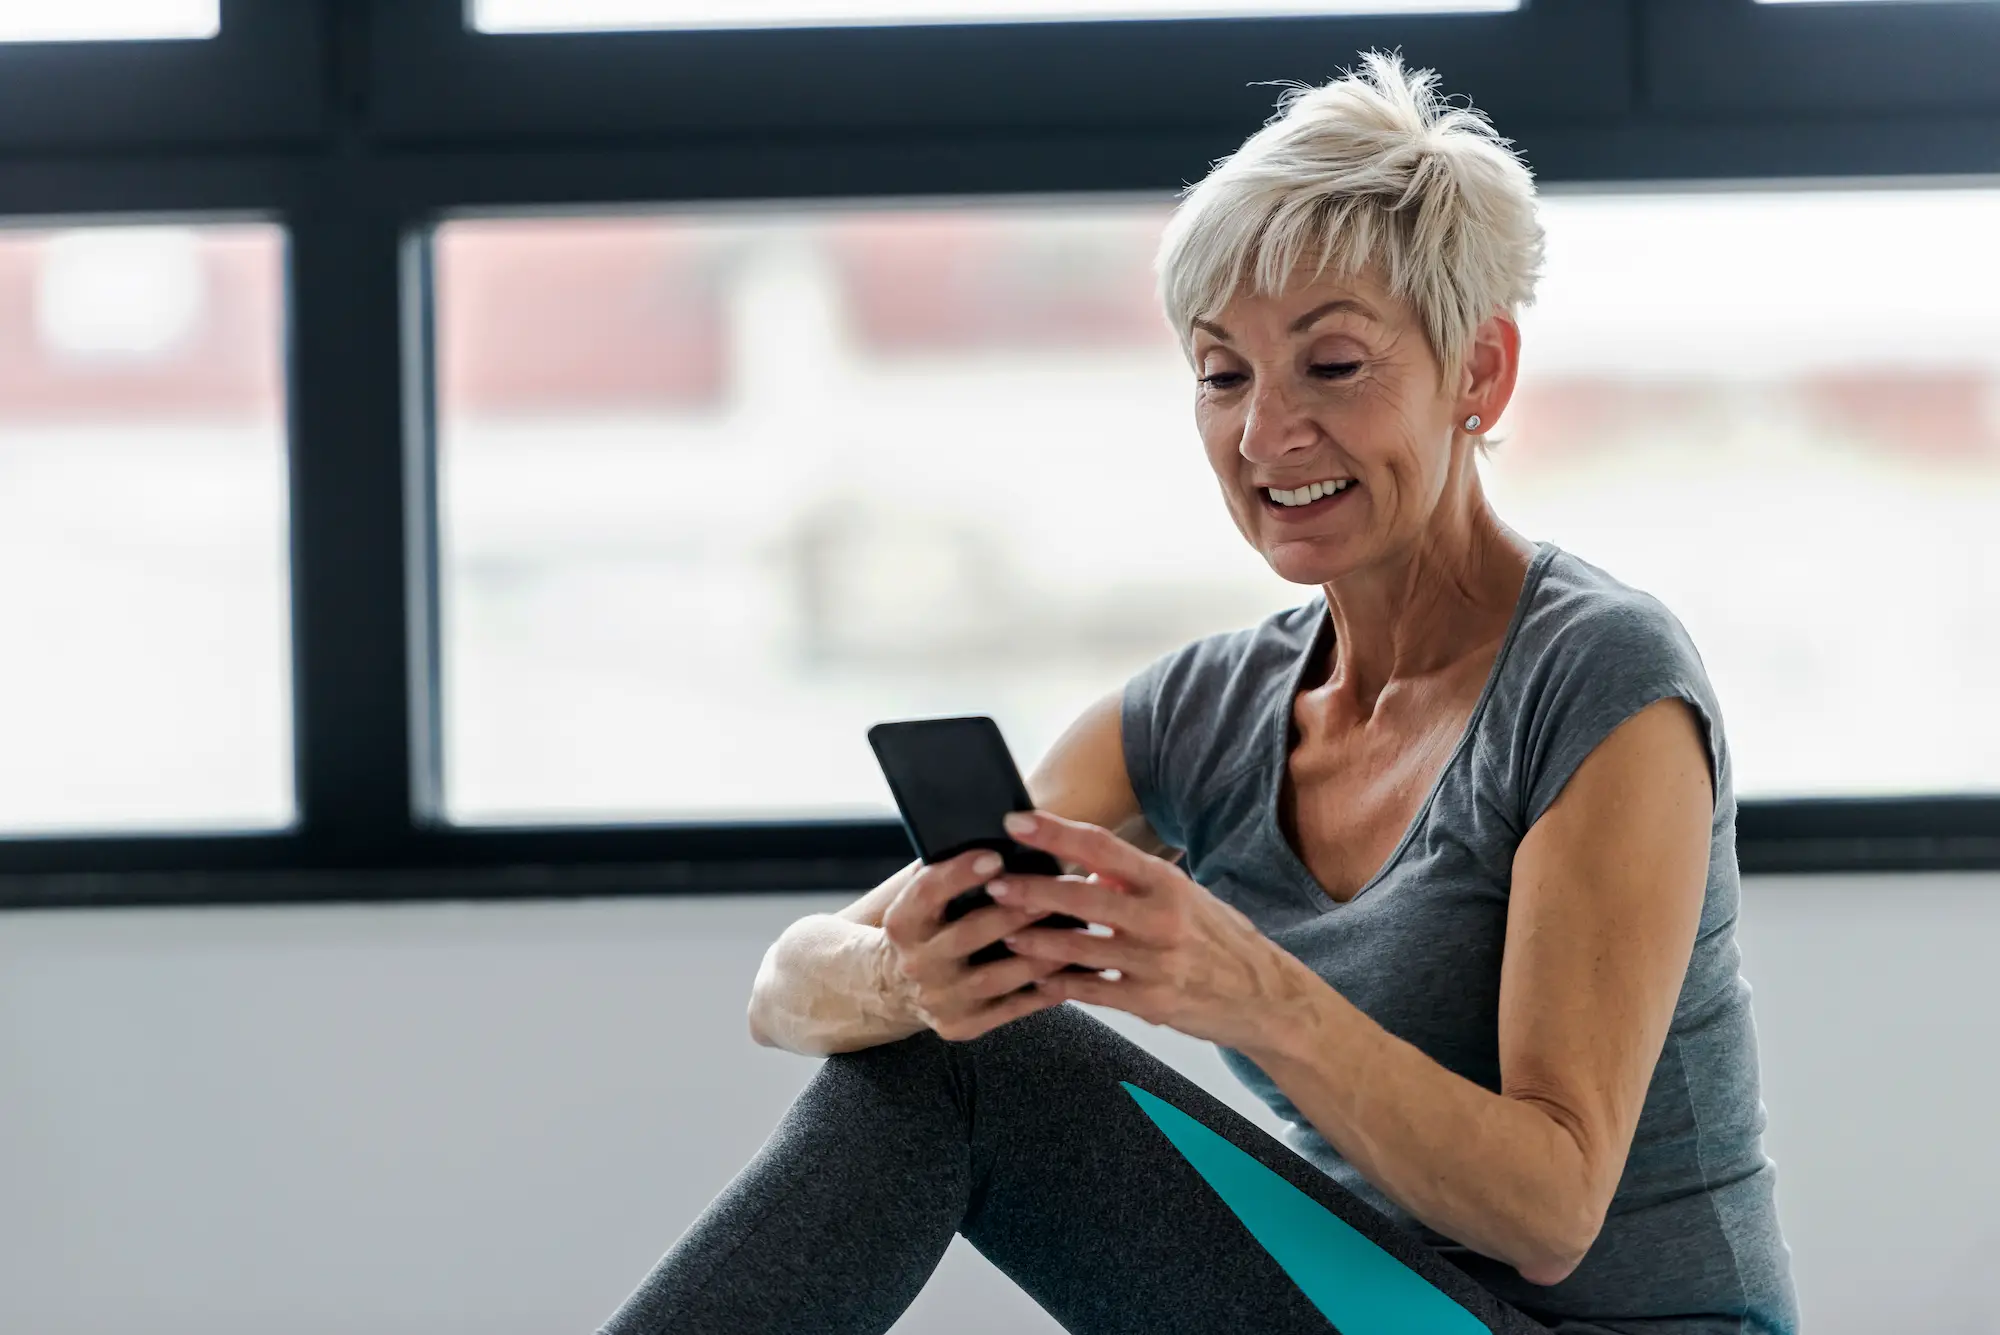 older woman looking at smartphone in gym clothes